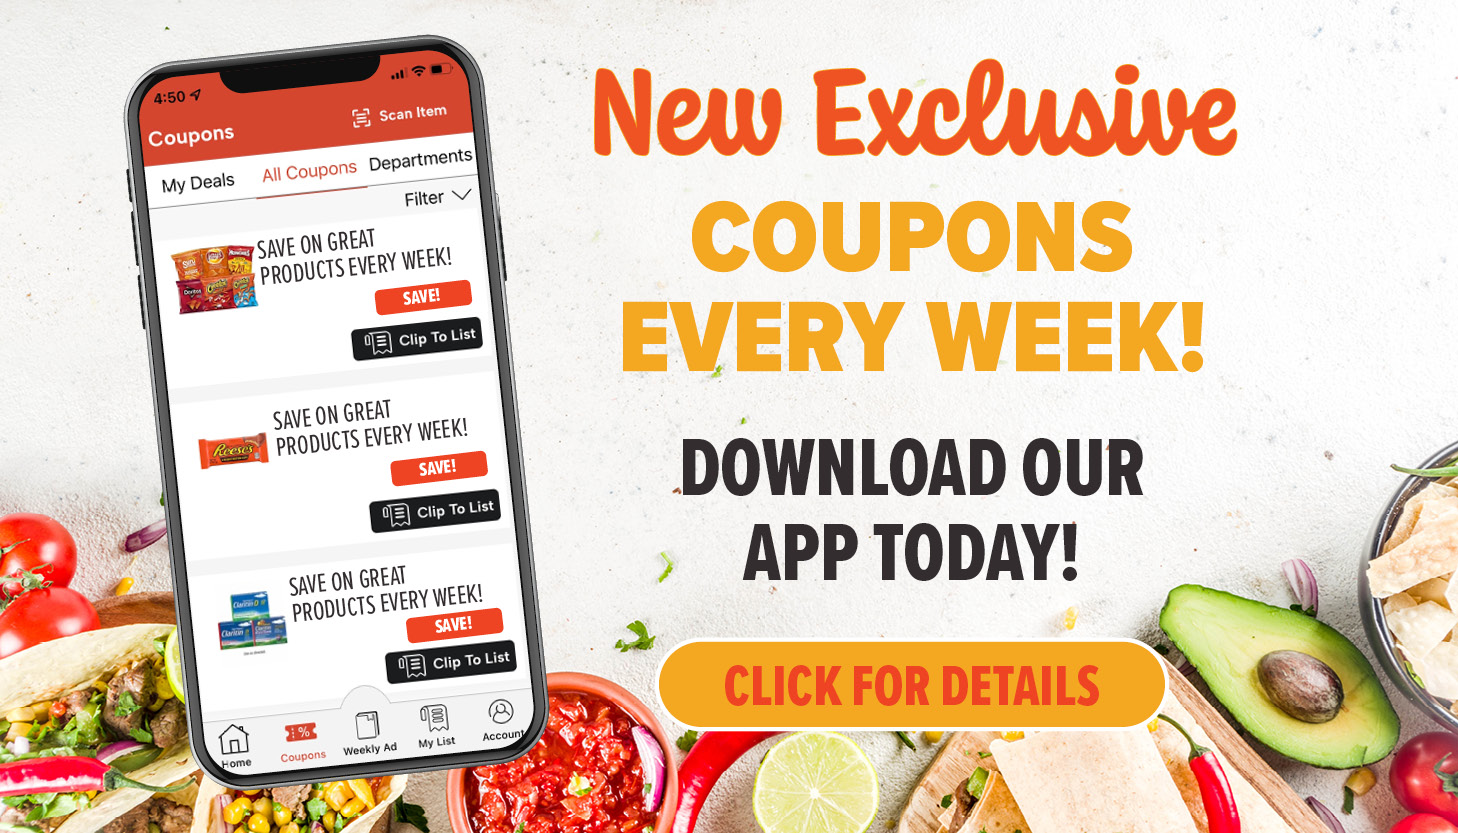 New Exclusive Coupons Every Week